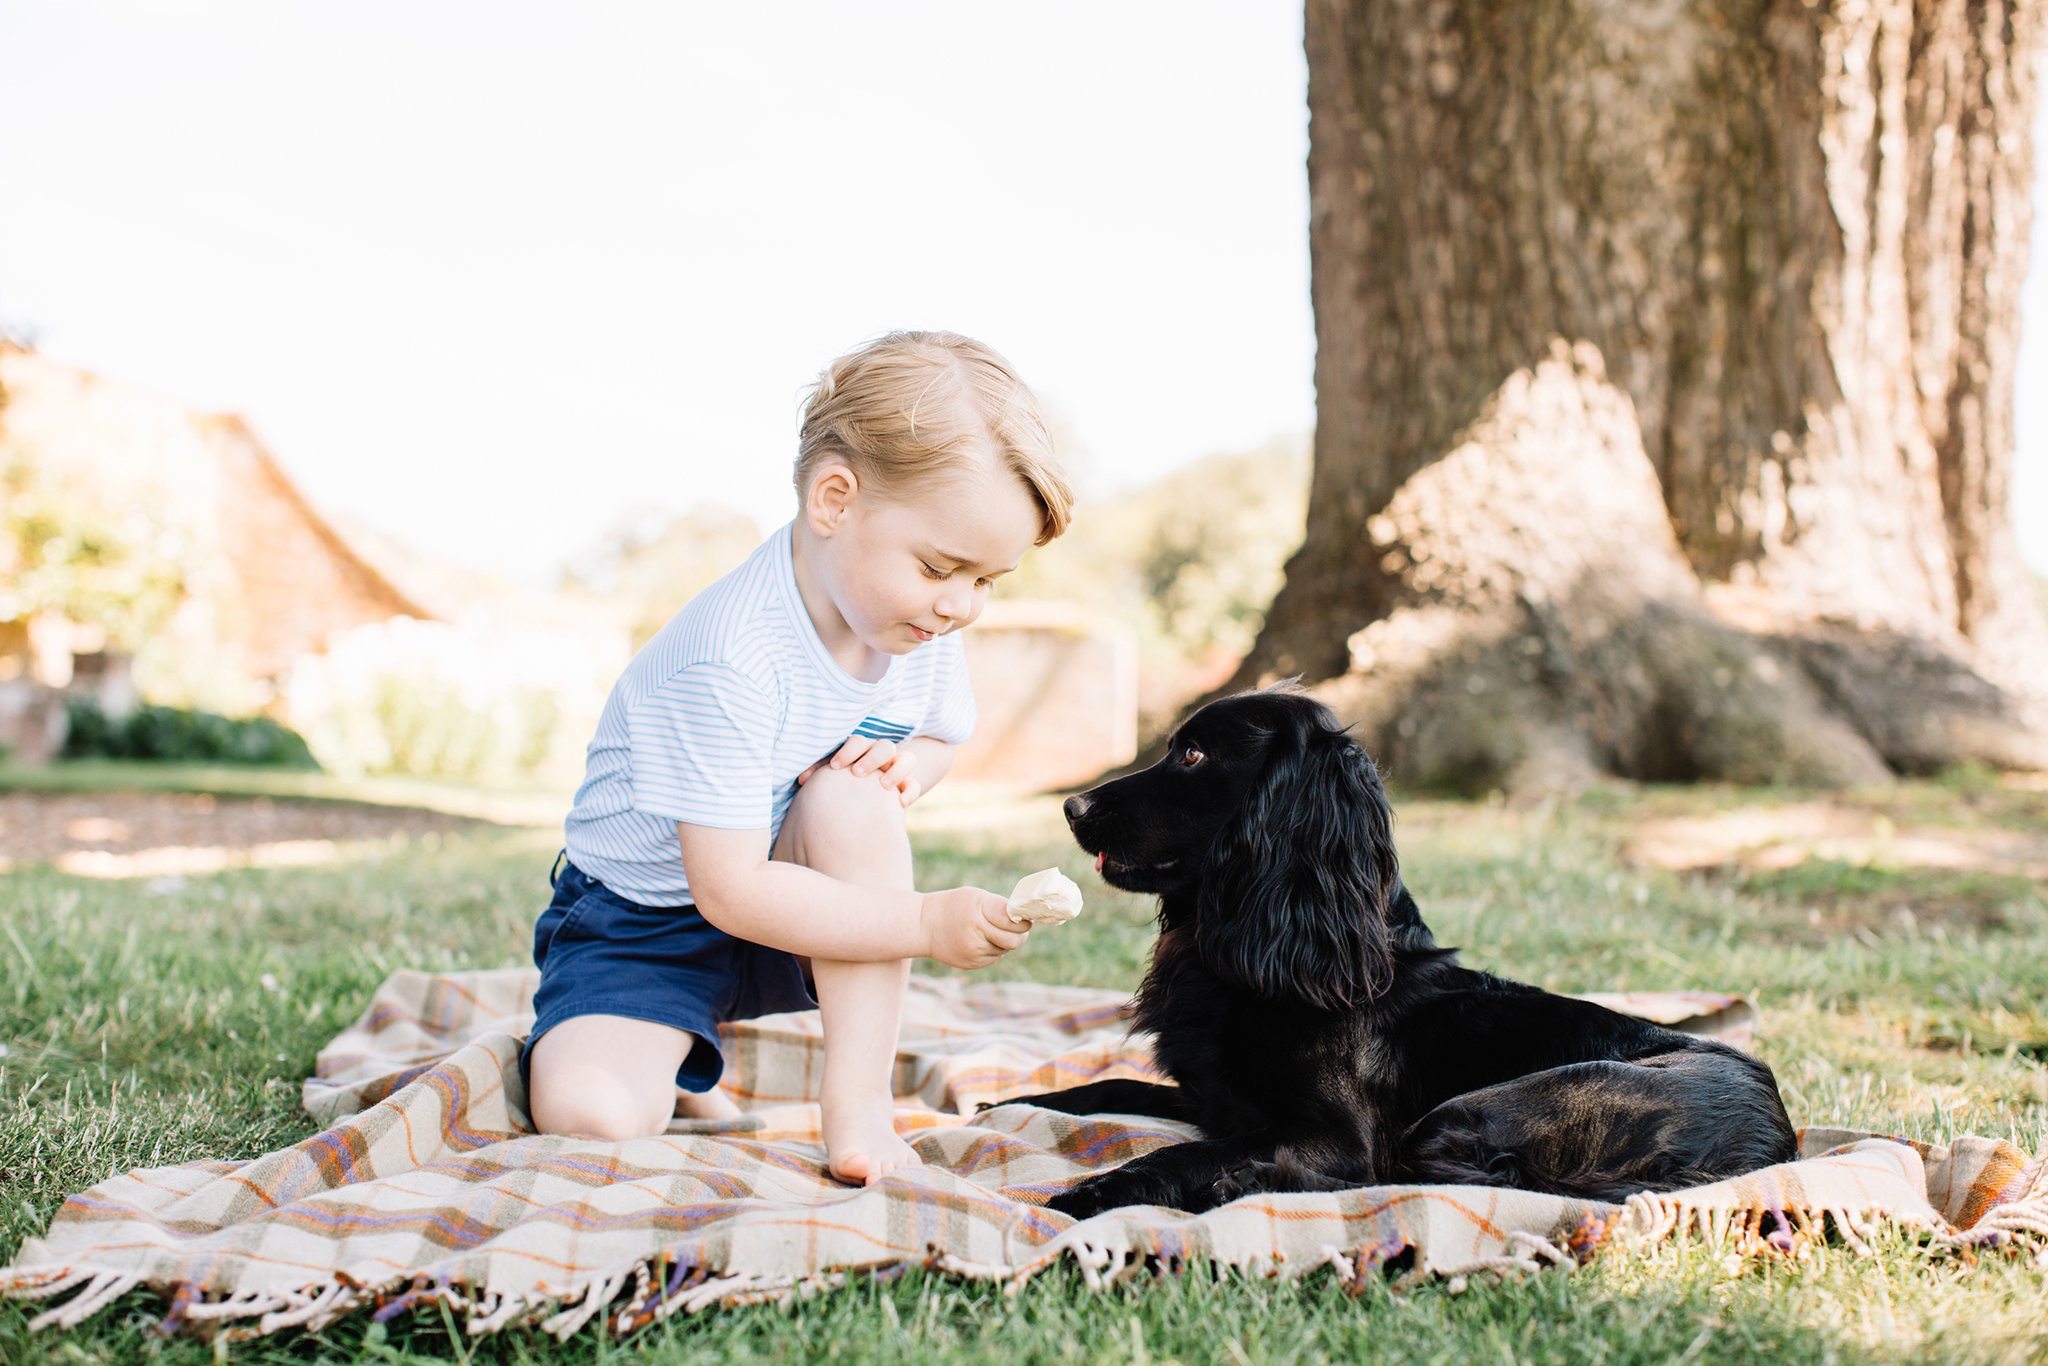 PHOTO: Britain's Prince George is seen in this photograph taken at his home in Norfolk in mid-July, and released by the Duke and Duchess of Cambridge to mark his third birthday, July 22, 2016.